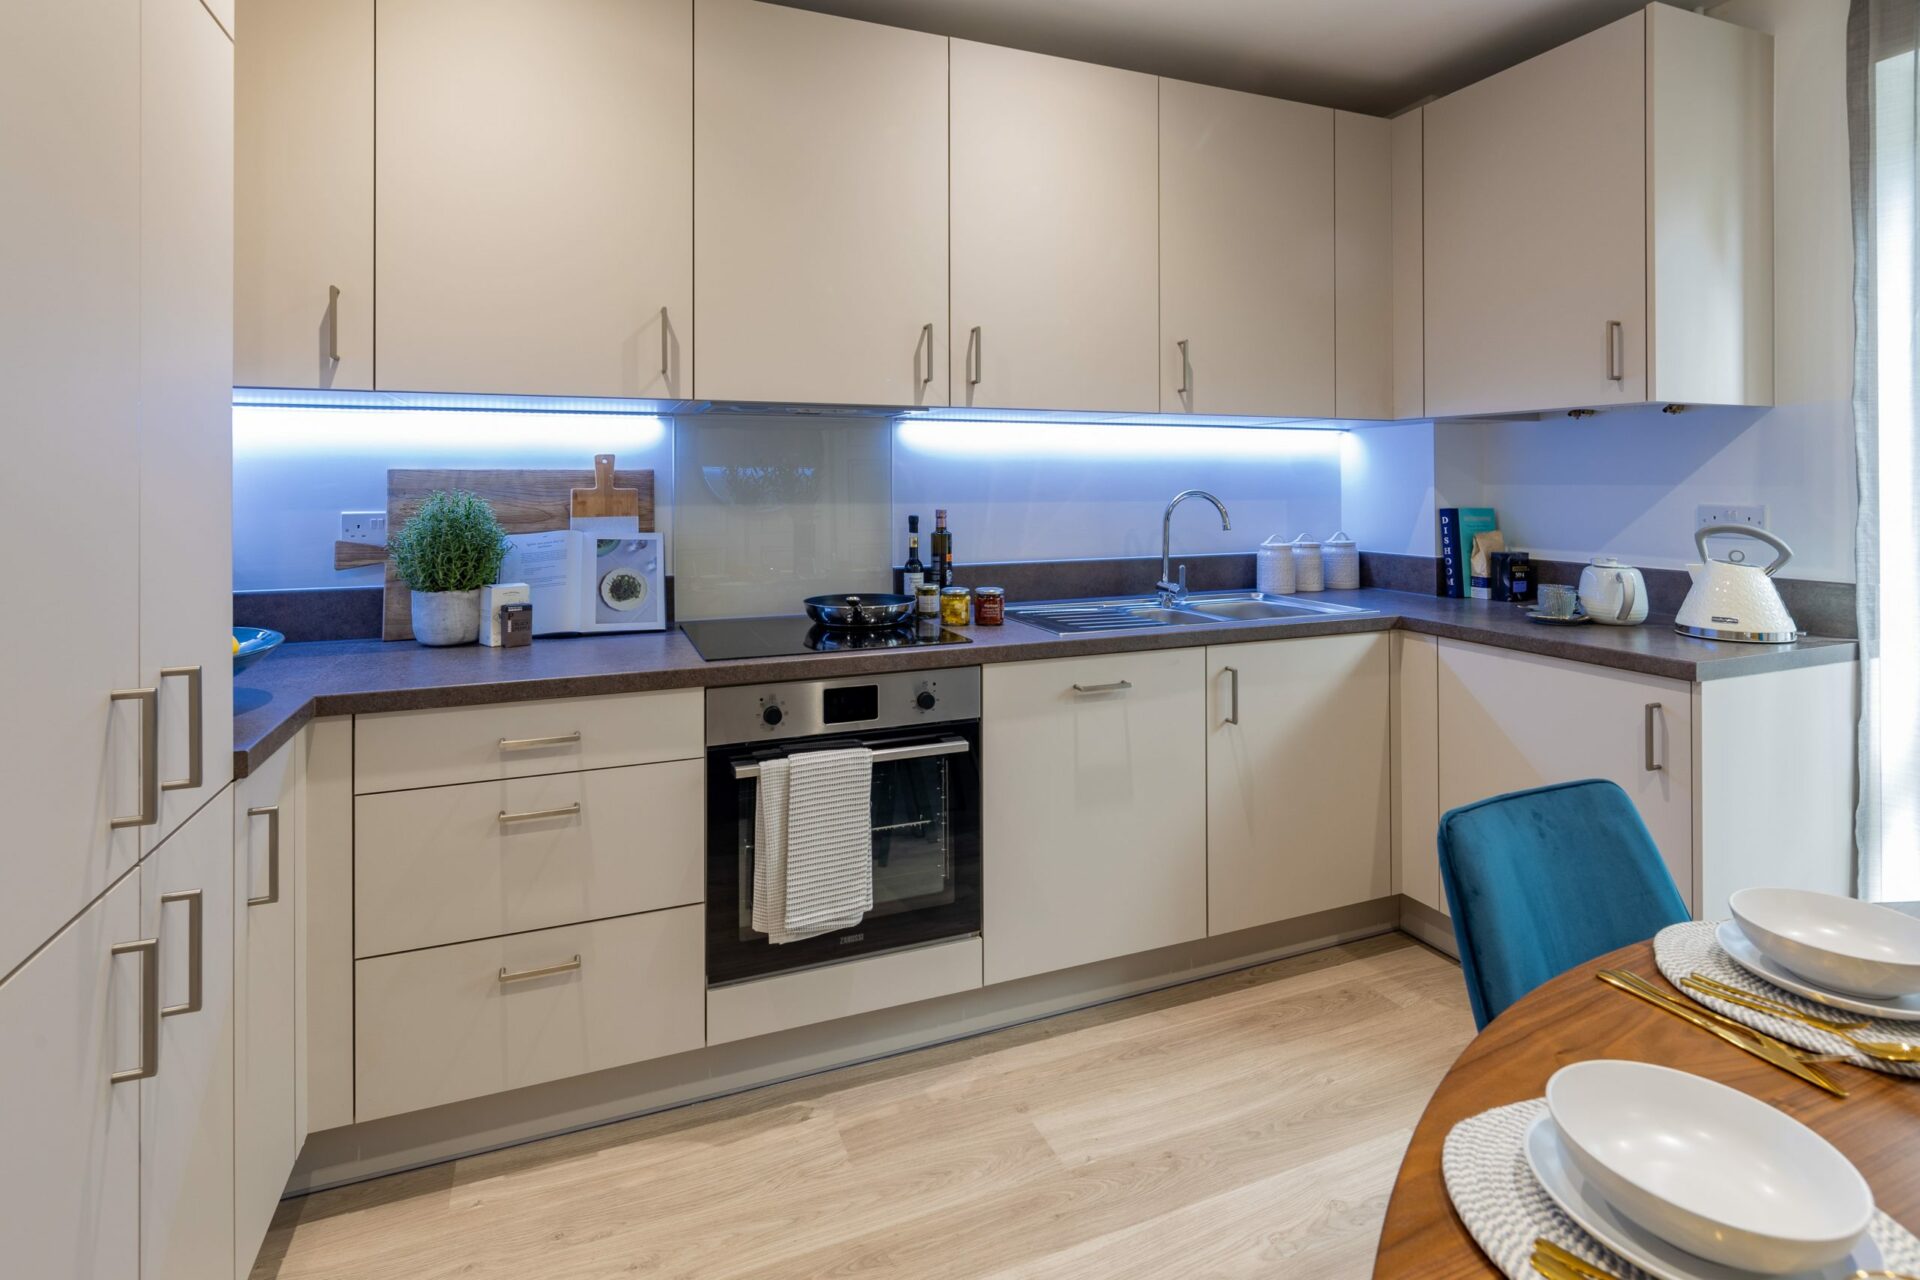 1, 2 & 3 Bedroom apartment kitchen and dinning area at Trent Park, Enfield